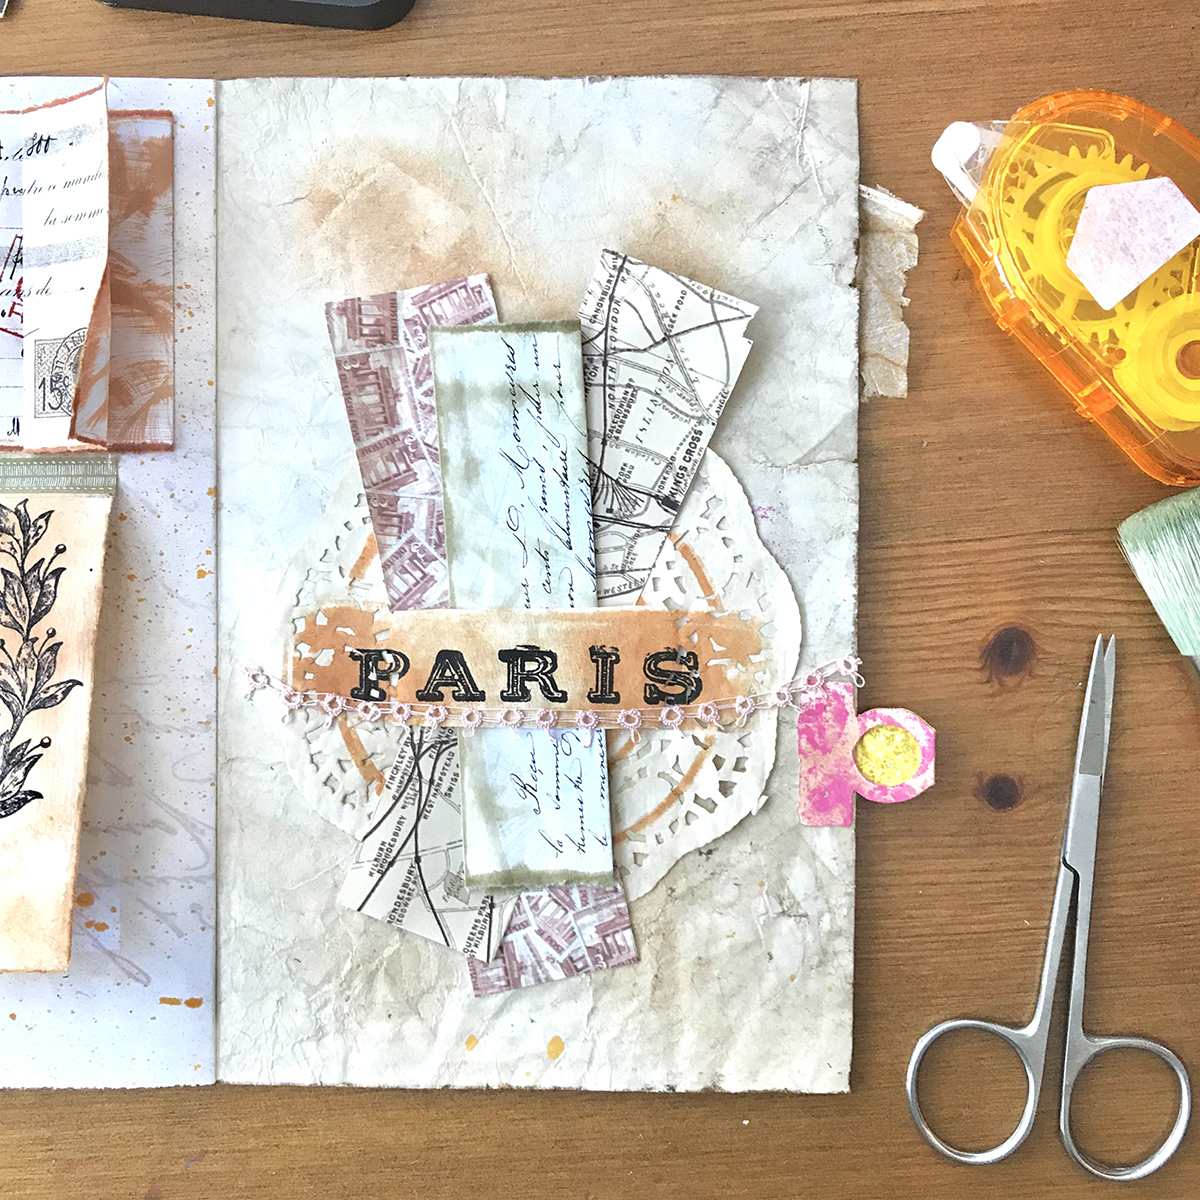 Paris with doily and papers on page and scissors and tape